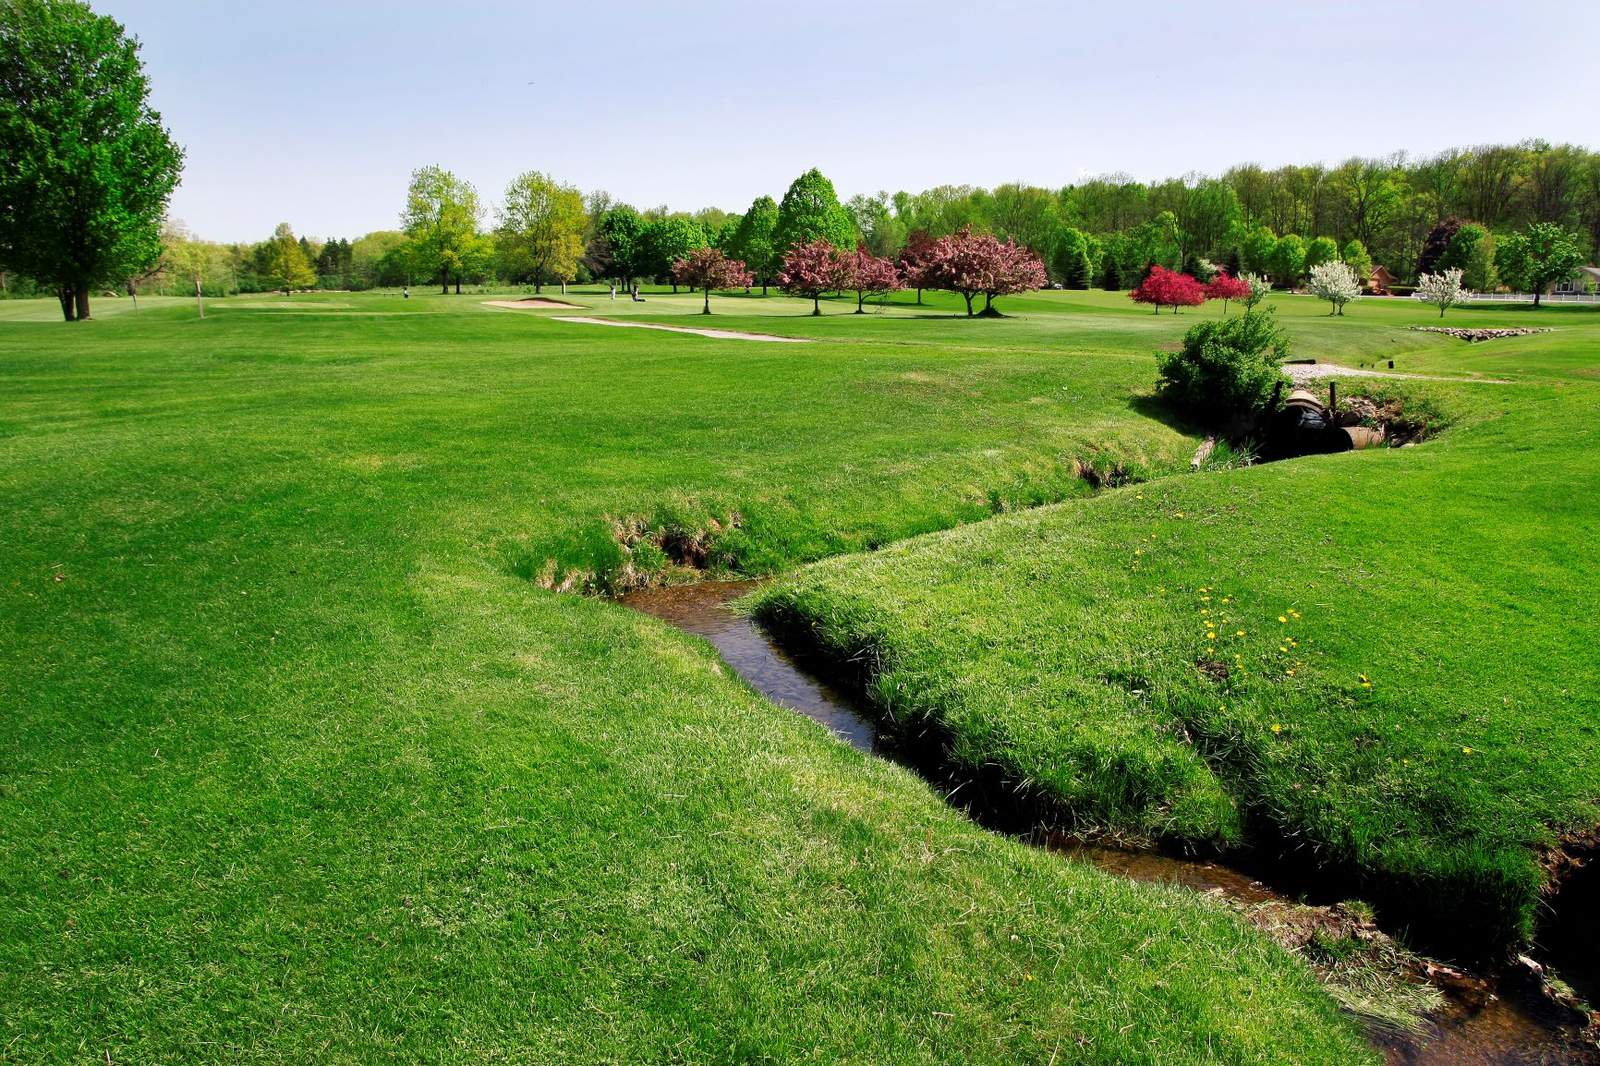 Construction to start on Huron Hills Golf Course in Ann Arbor